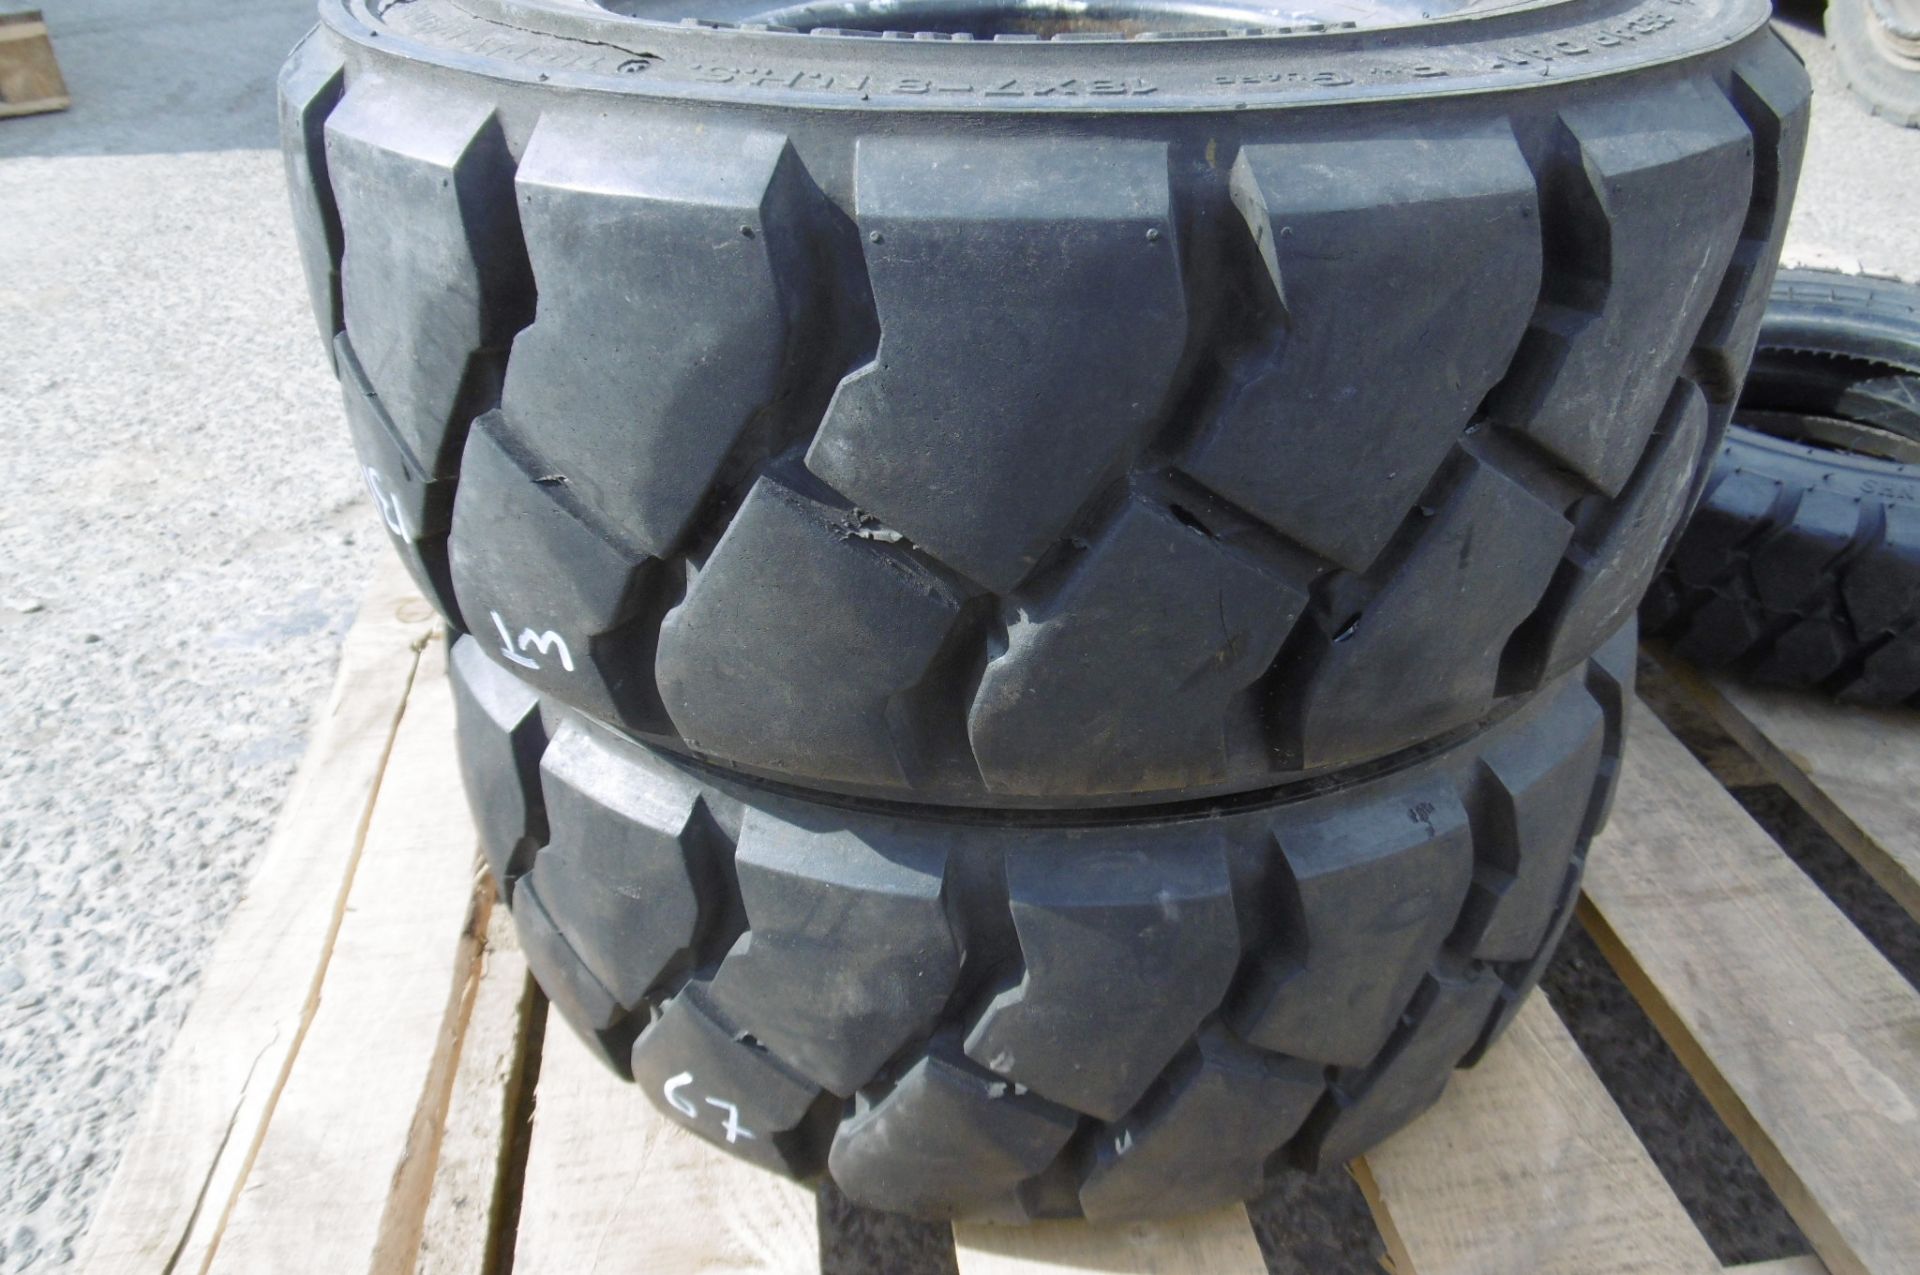 4 x Mixed 18x7-8 Continental and Widewall Tyres and 1 x Watts 4.00x8 Tyre - Image 10 of 10